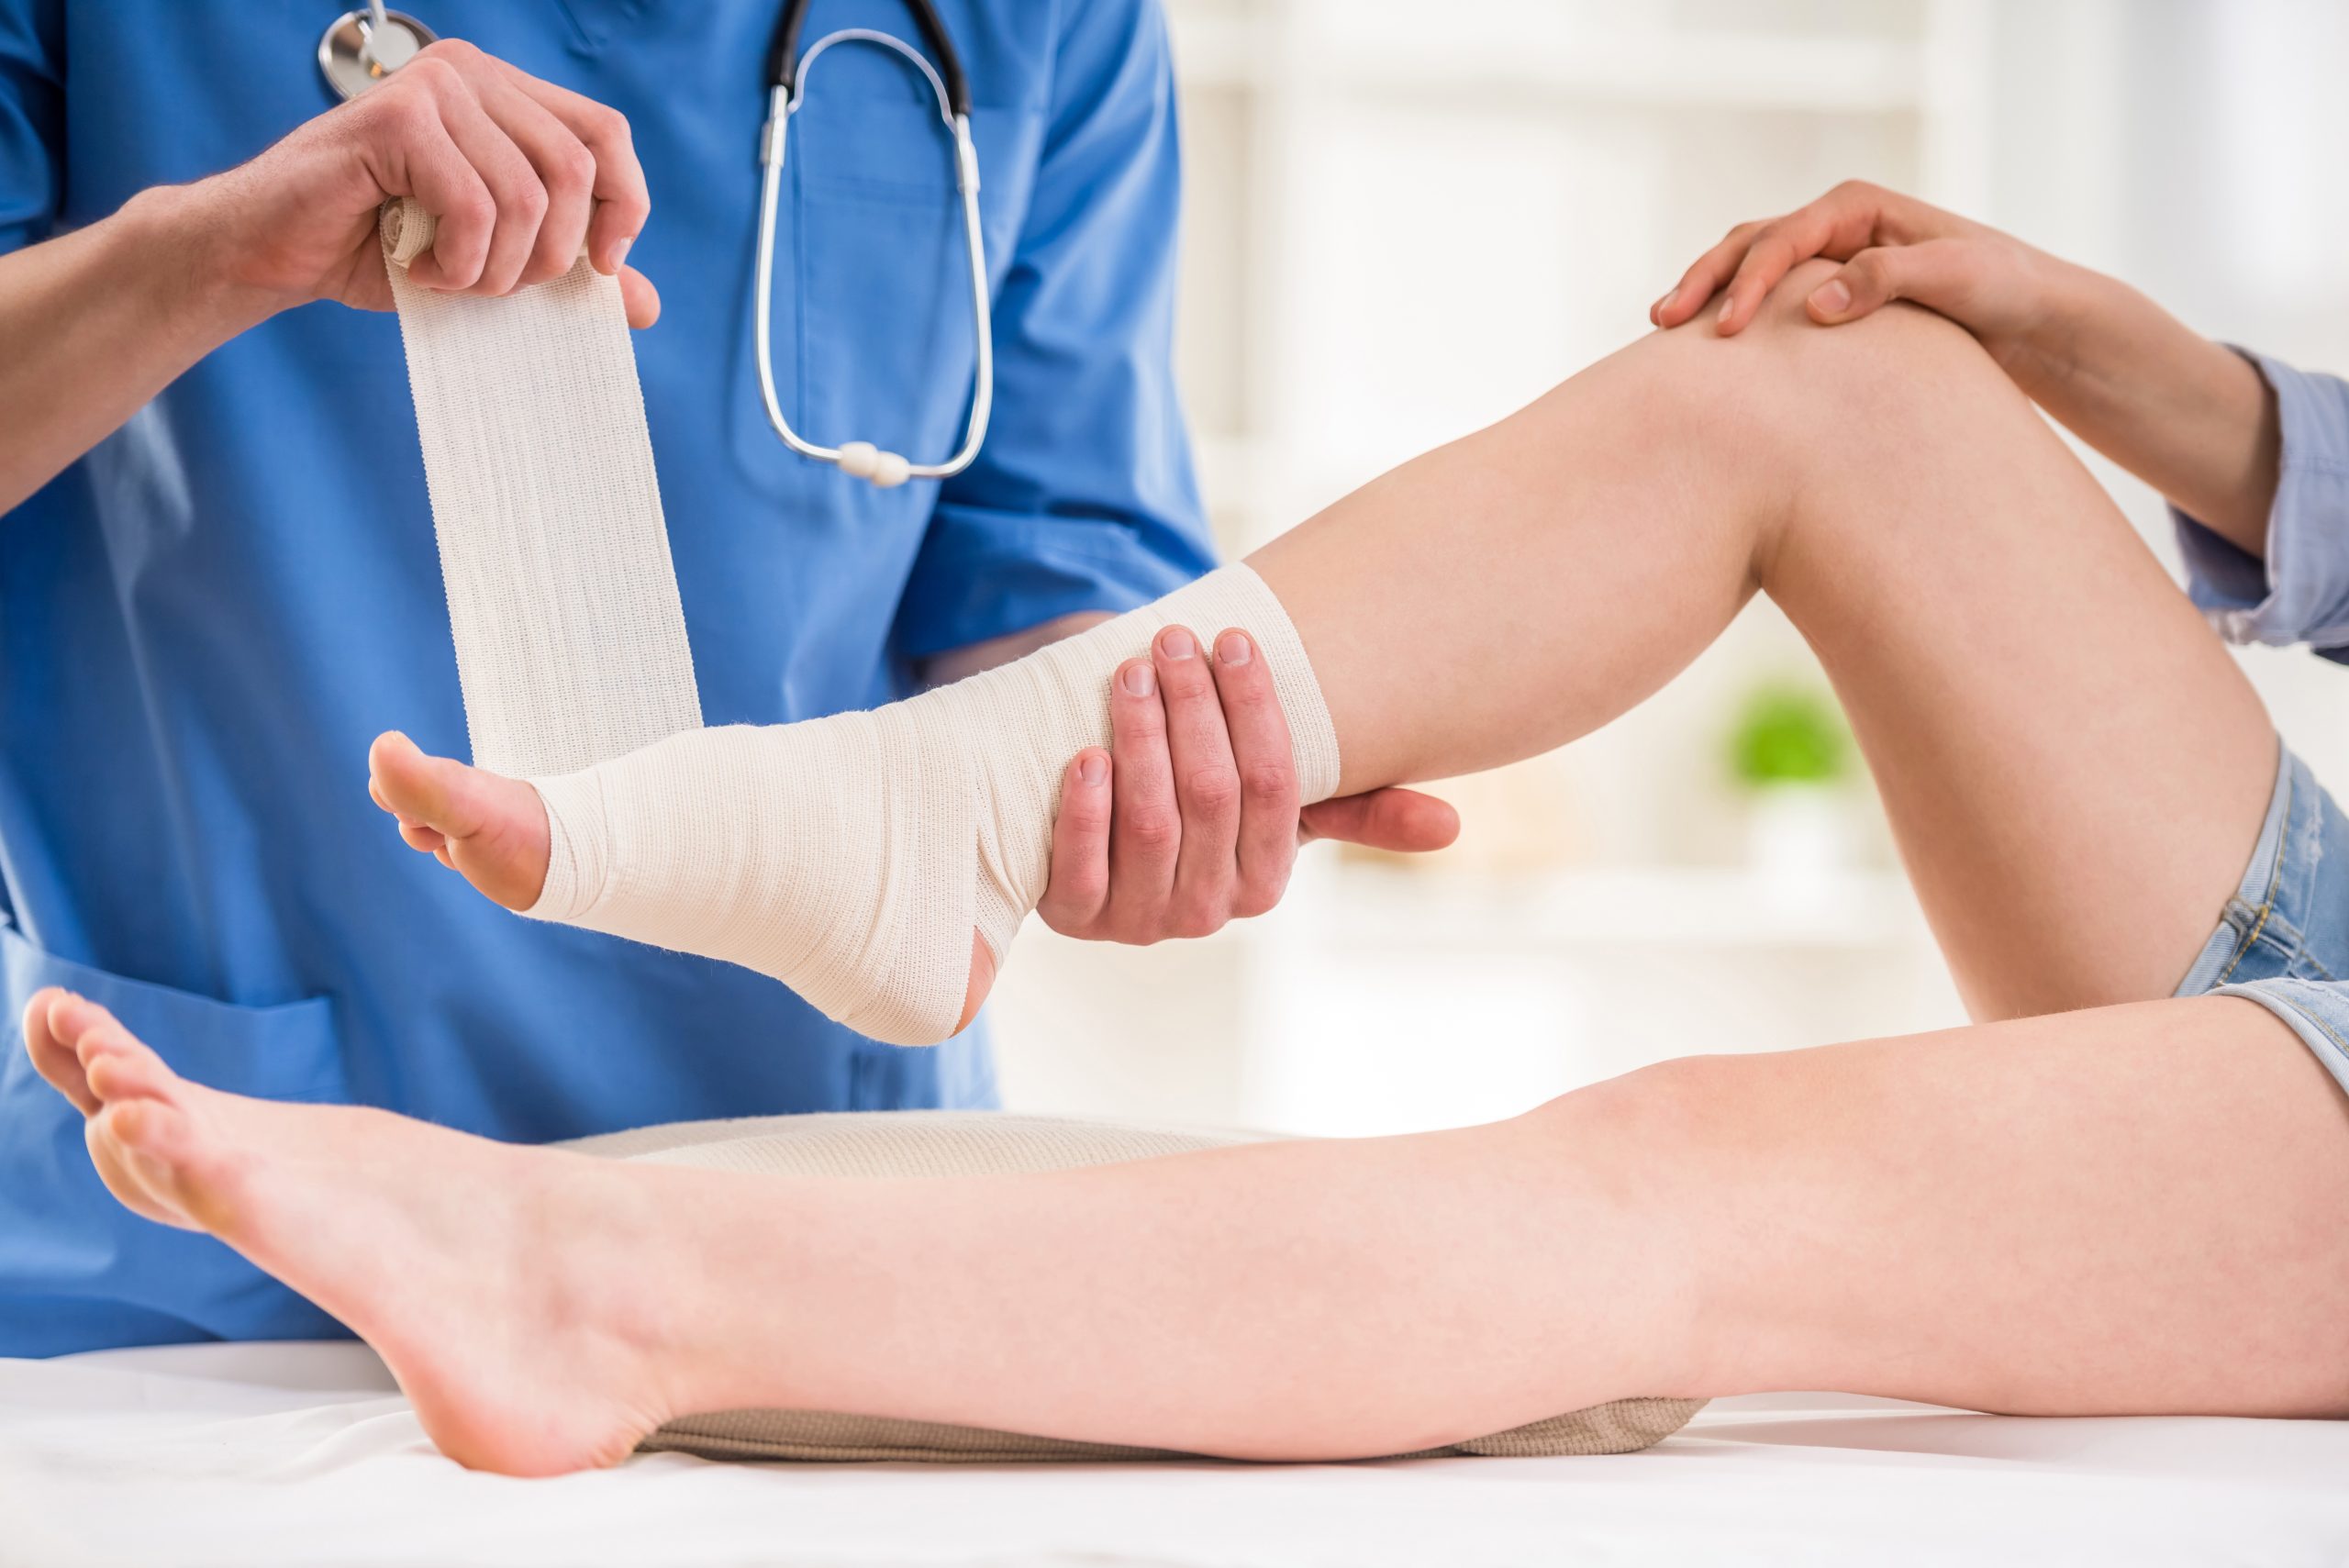 How to bandage the foot and when to use it